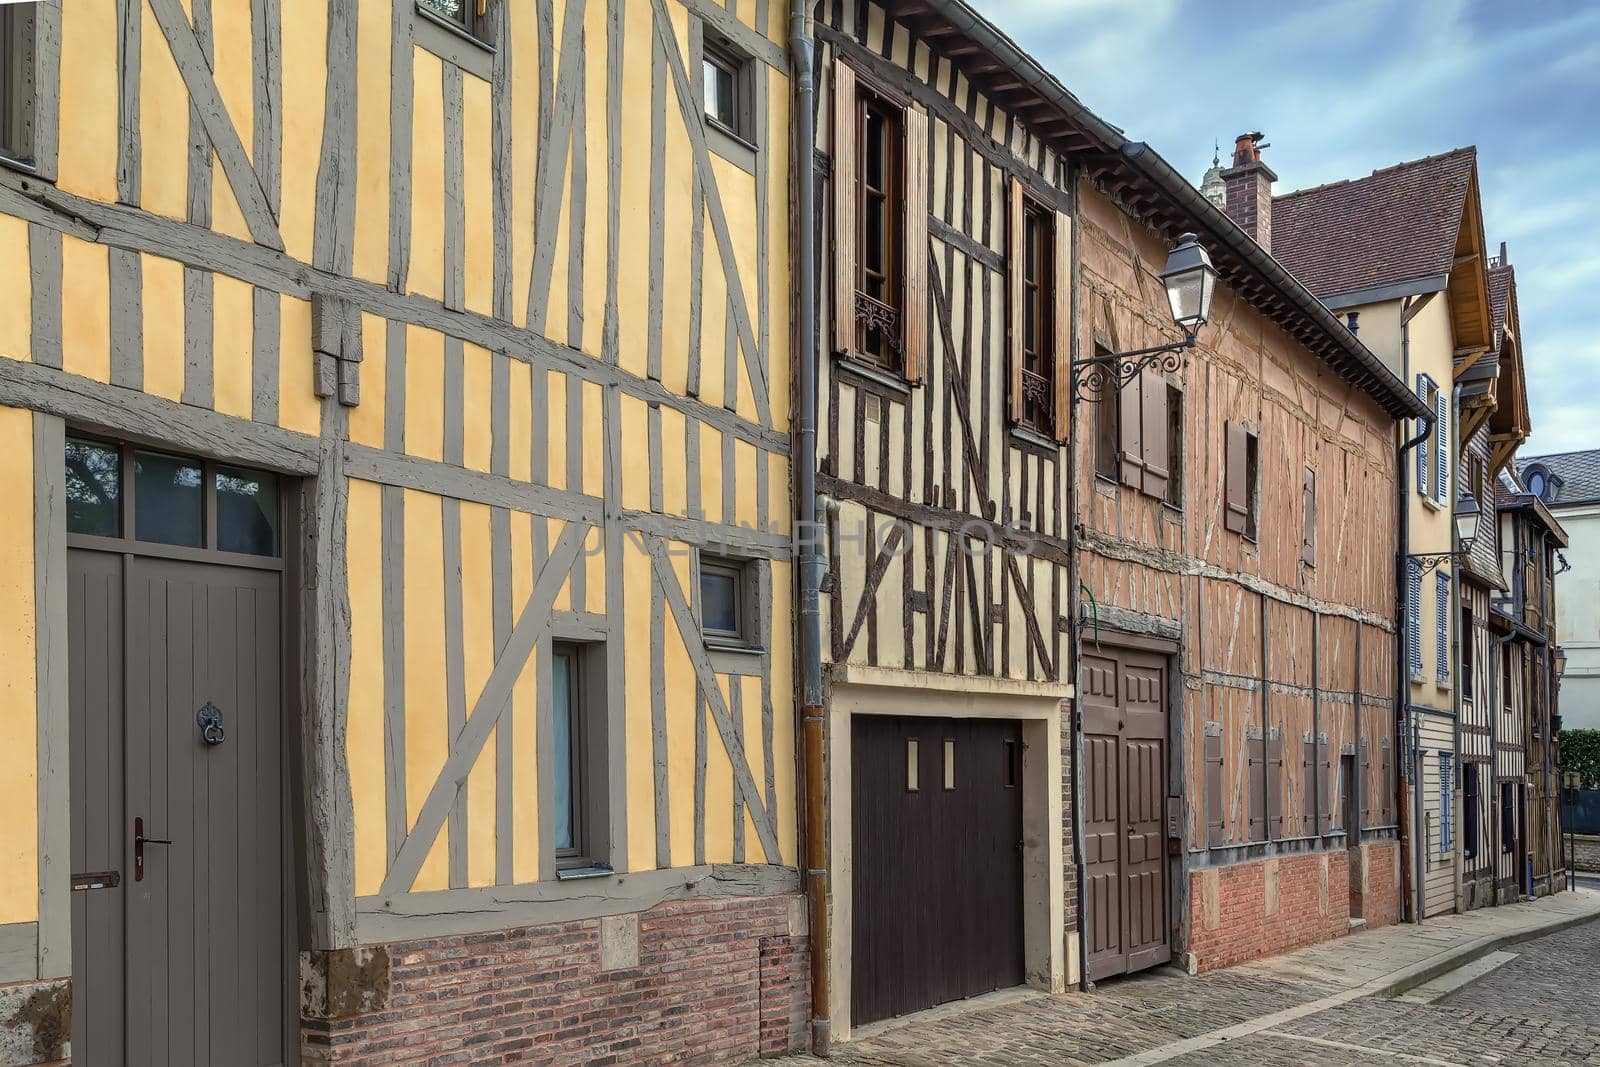 Street in Troyes, France by borisb17